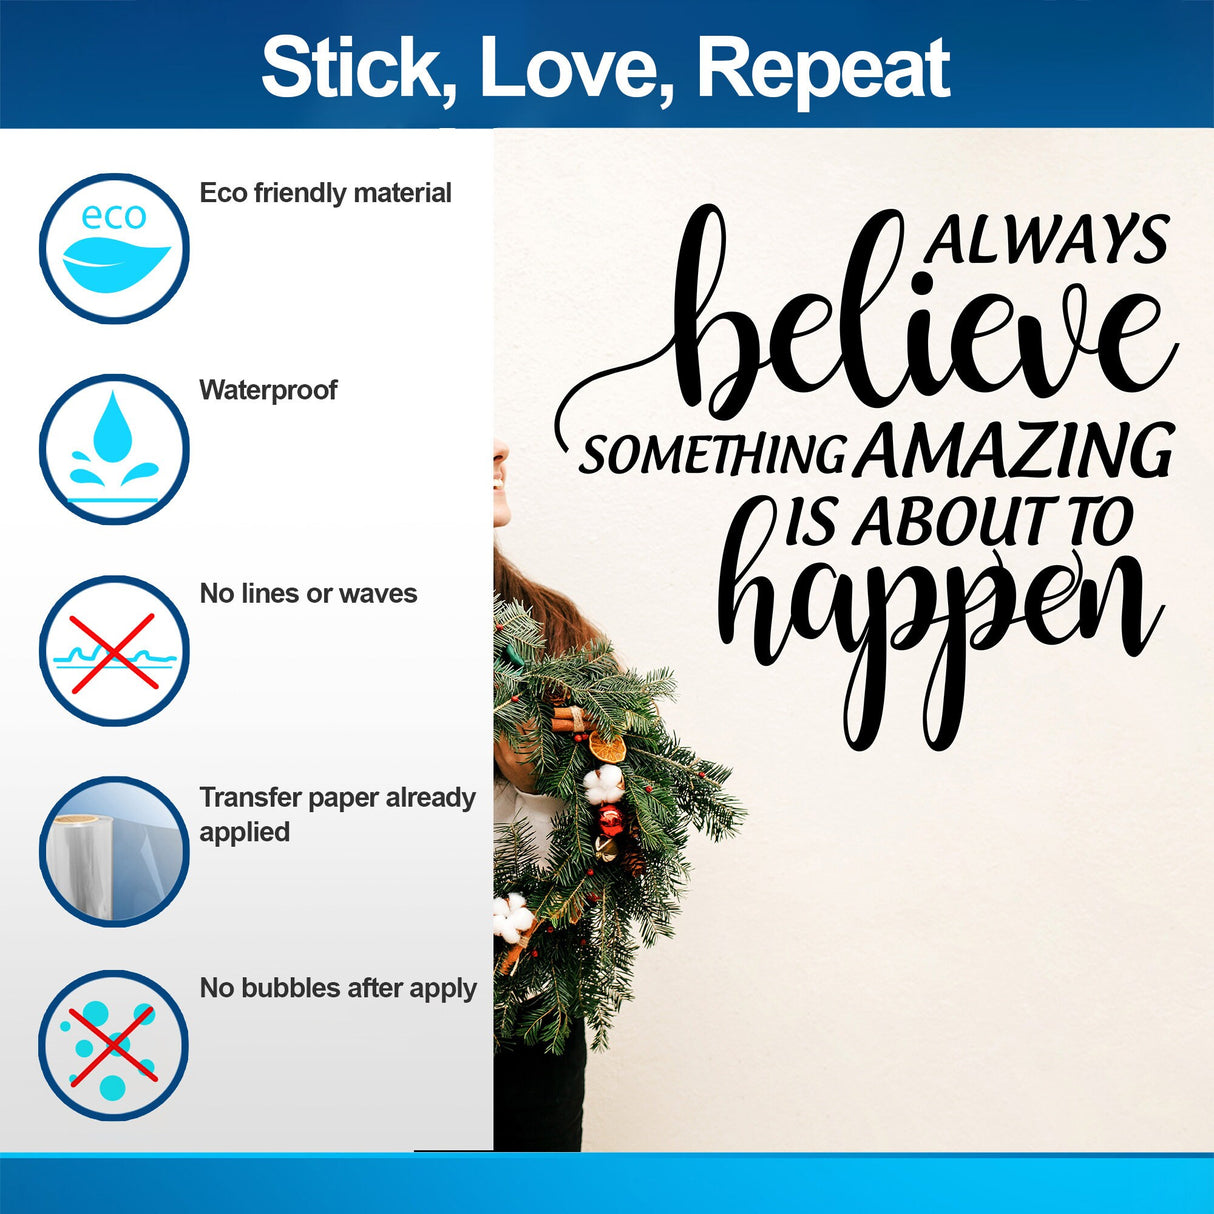 Inspiring Christmas Quote Wall Vinyl Sticker - "Always Believe Something Amazing is About to Happen" Living Room Text Decal Sign Decor